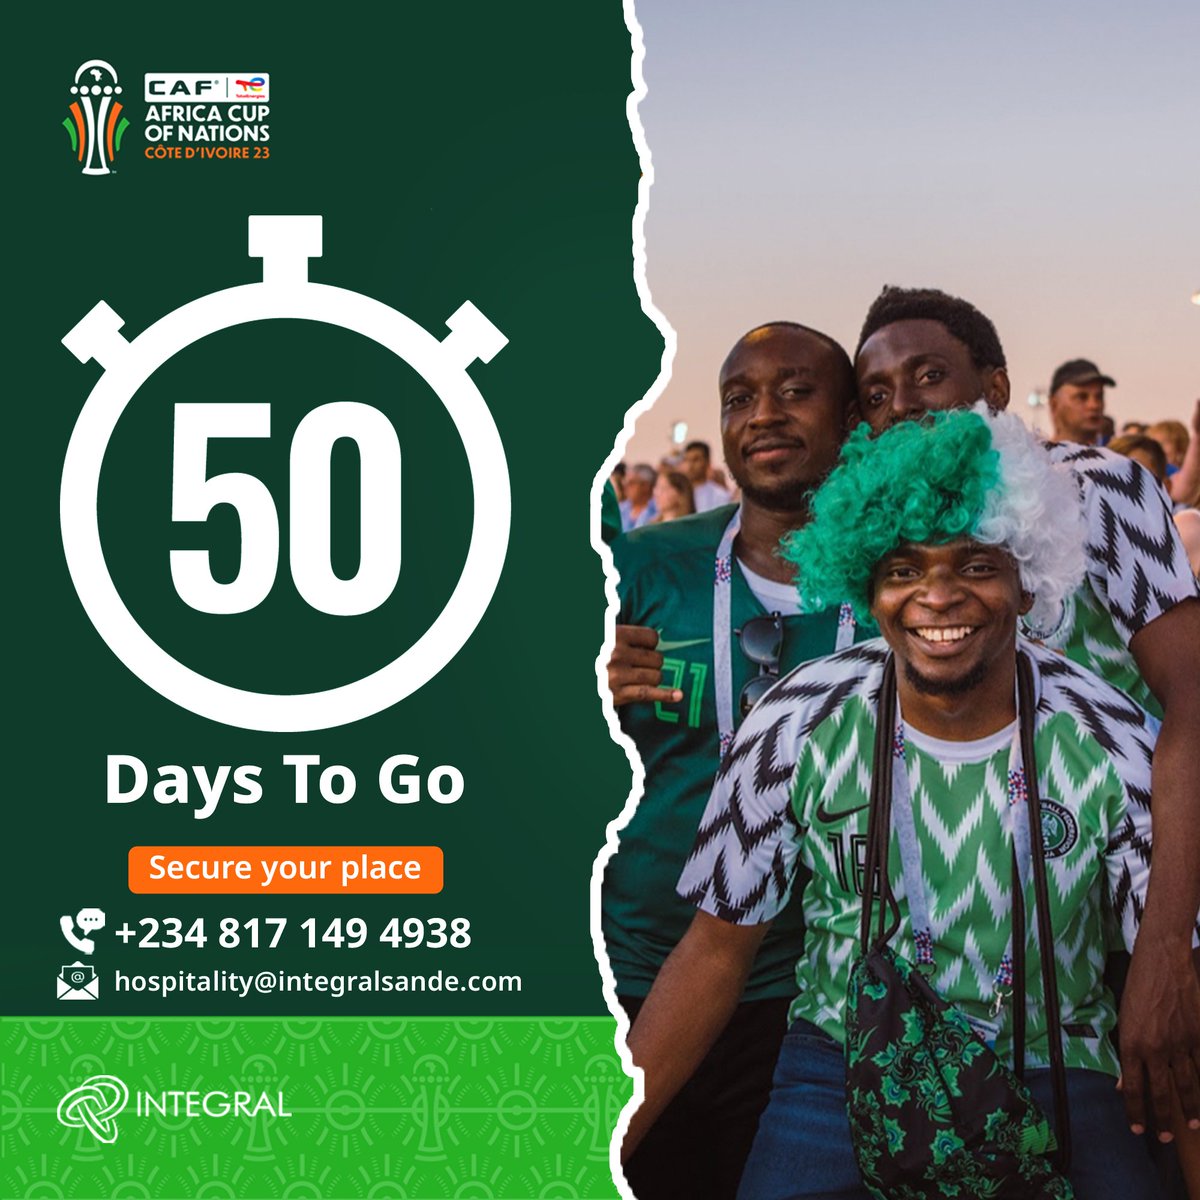 Immerse yourself in the rich blend of African culture and complemented by an enchanting sports hospitality experience at ANY of the 52 matches at the #TotalEnergiesAfcon2023. 

DM or send us an email to express your interest 

#sportshospitality #Afcon2023 #FootballIsIntegral